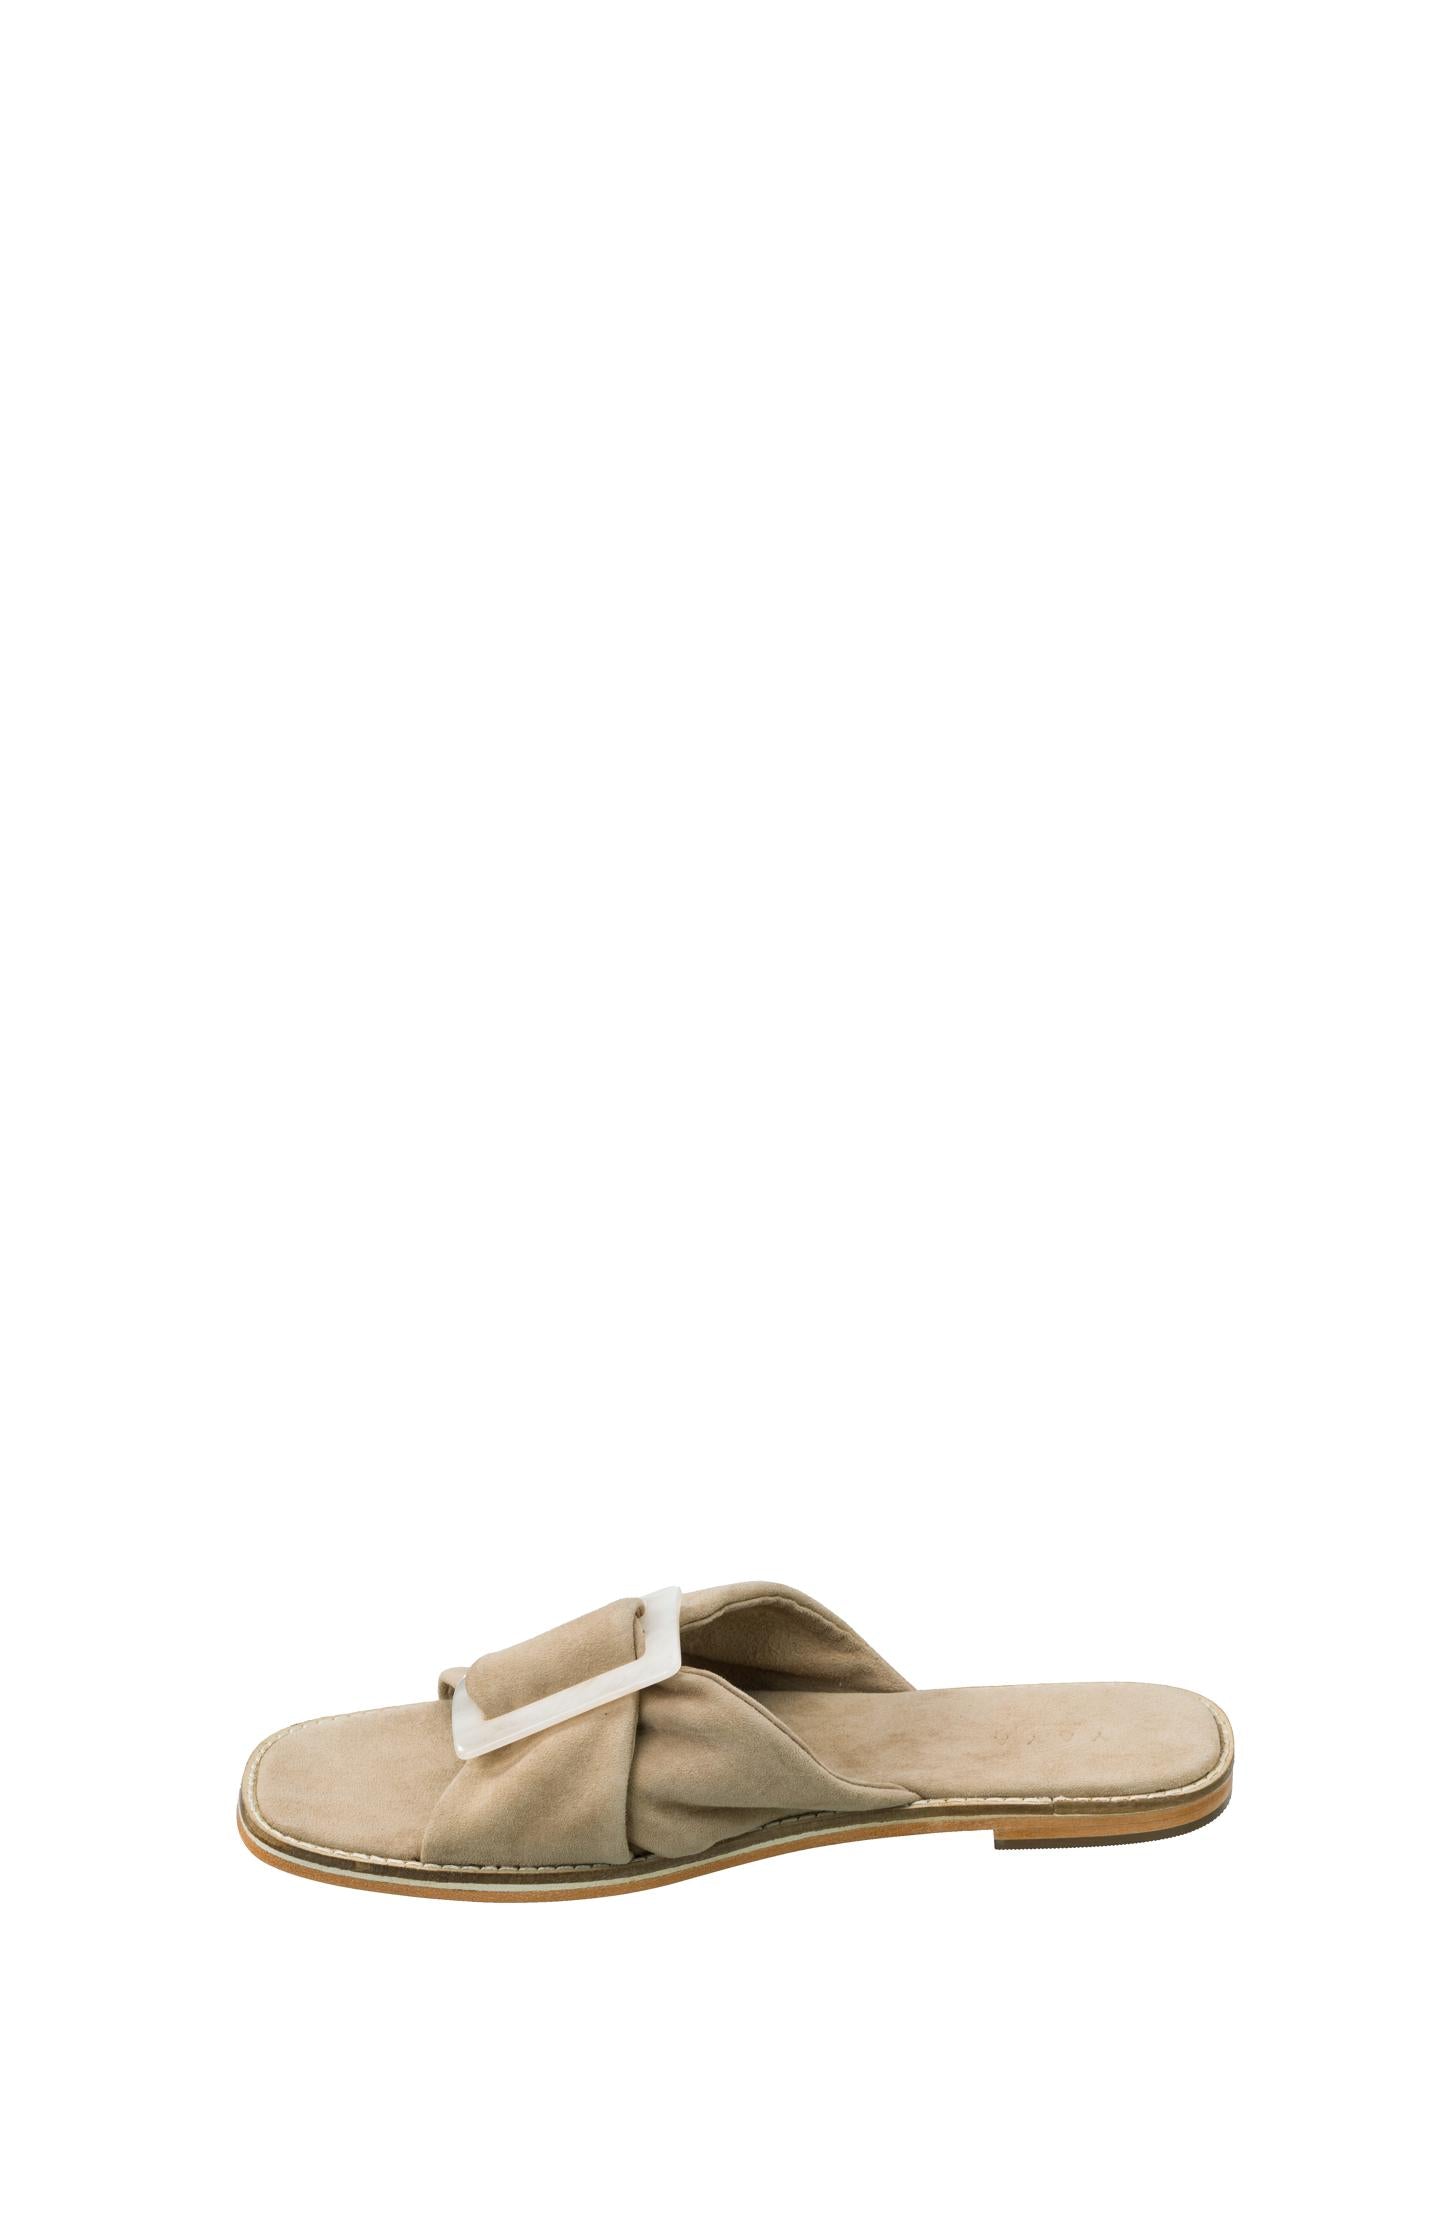 Suede slipper with buckle and crossed straps - Weathered Teak Green